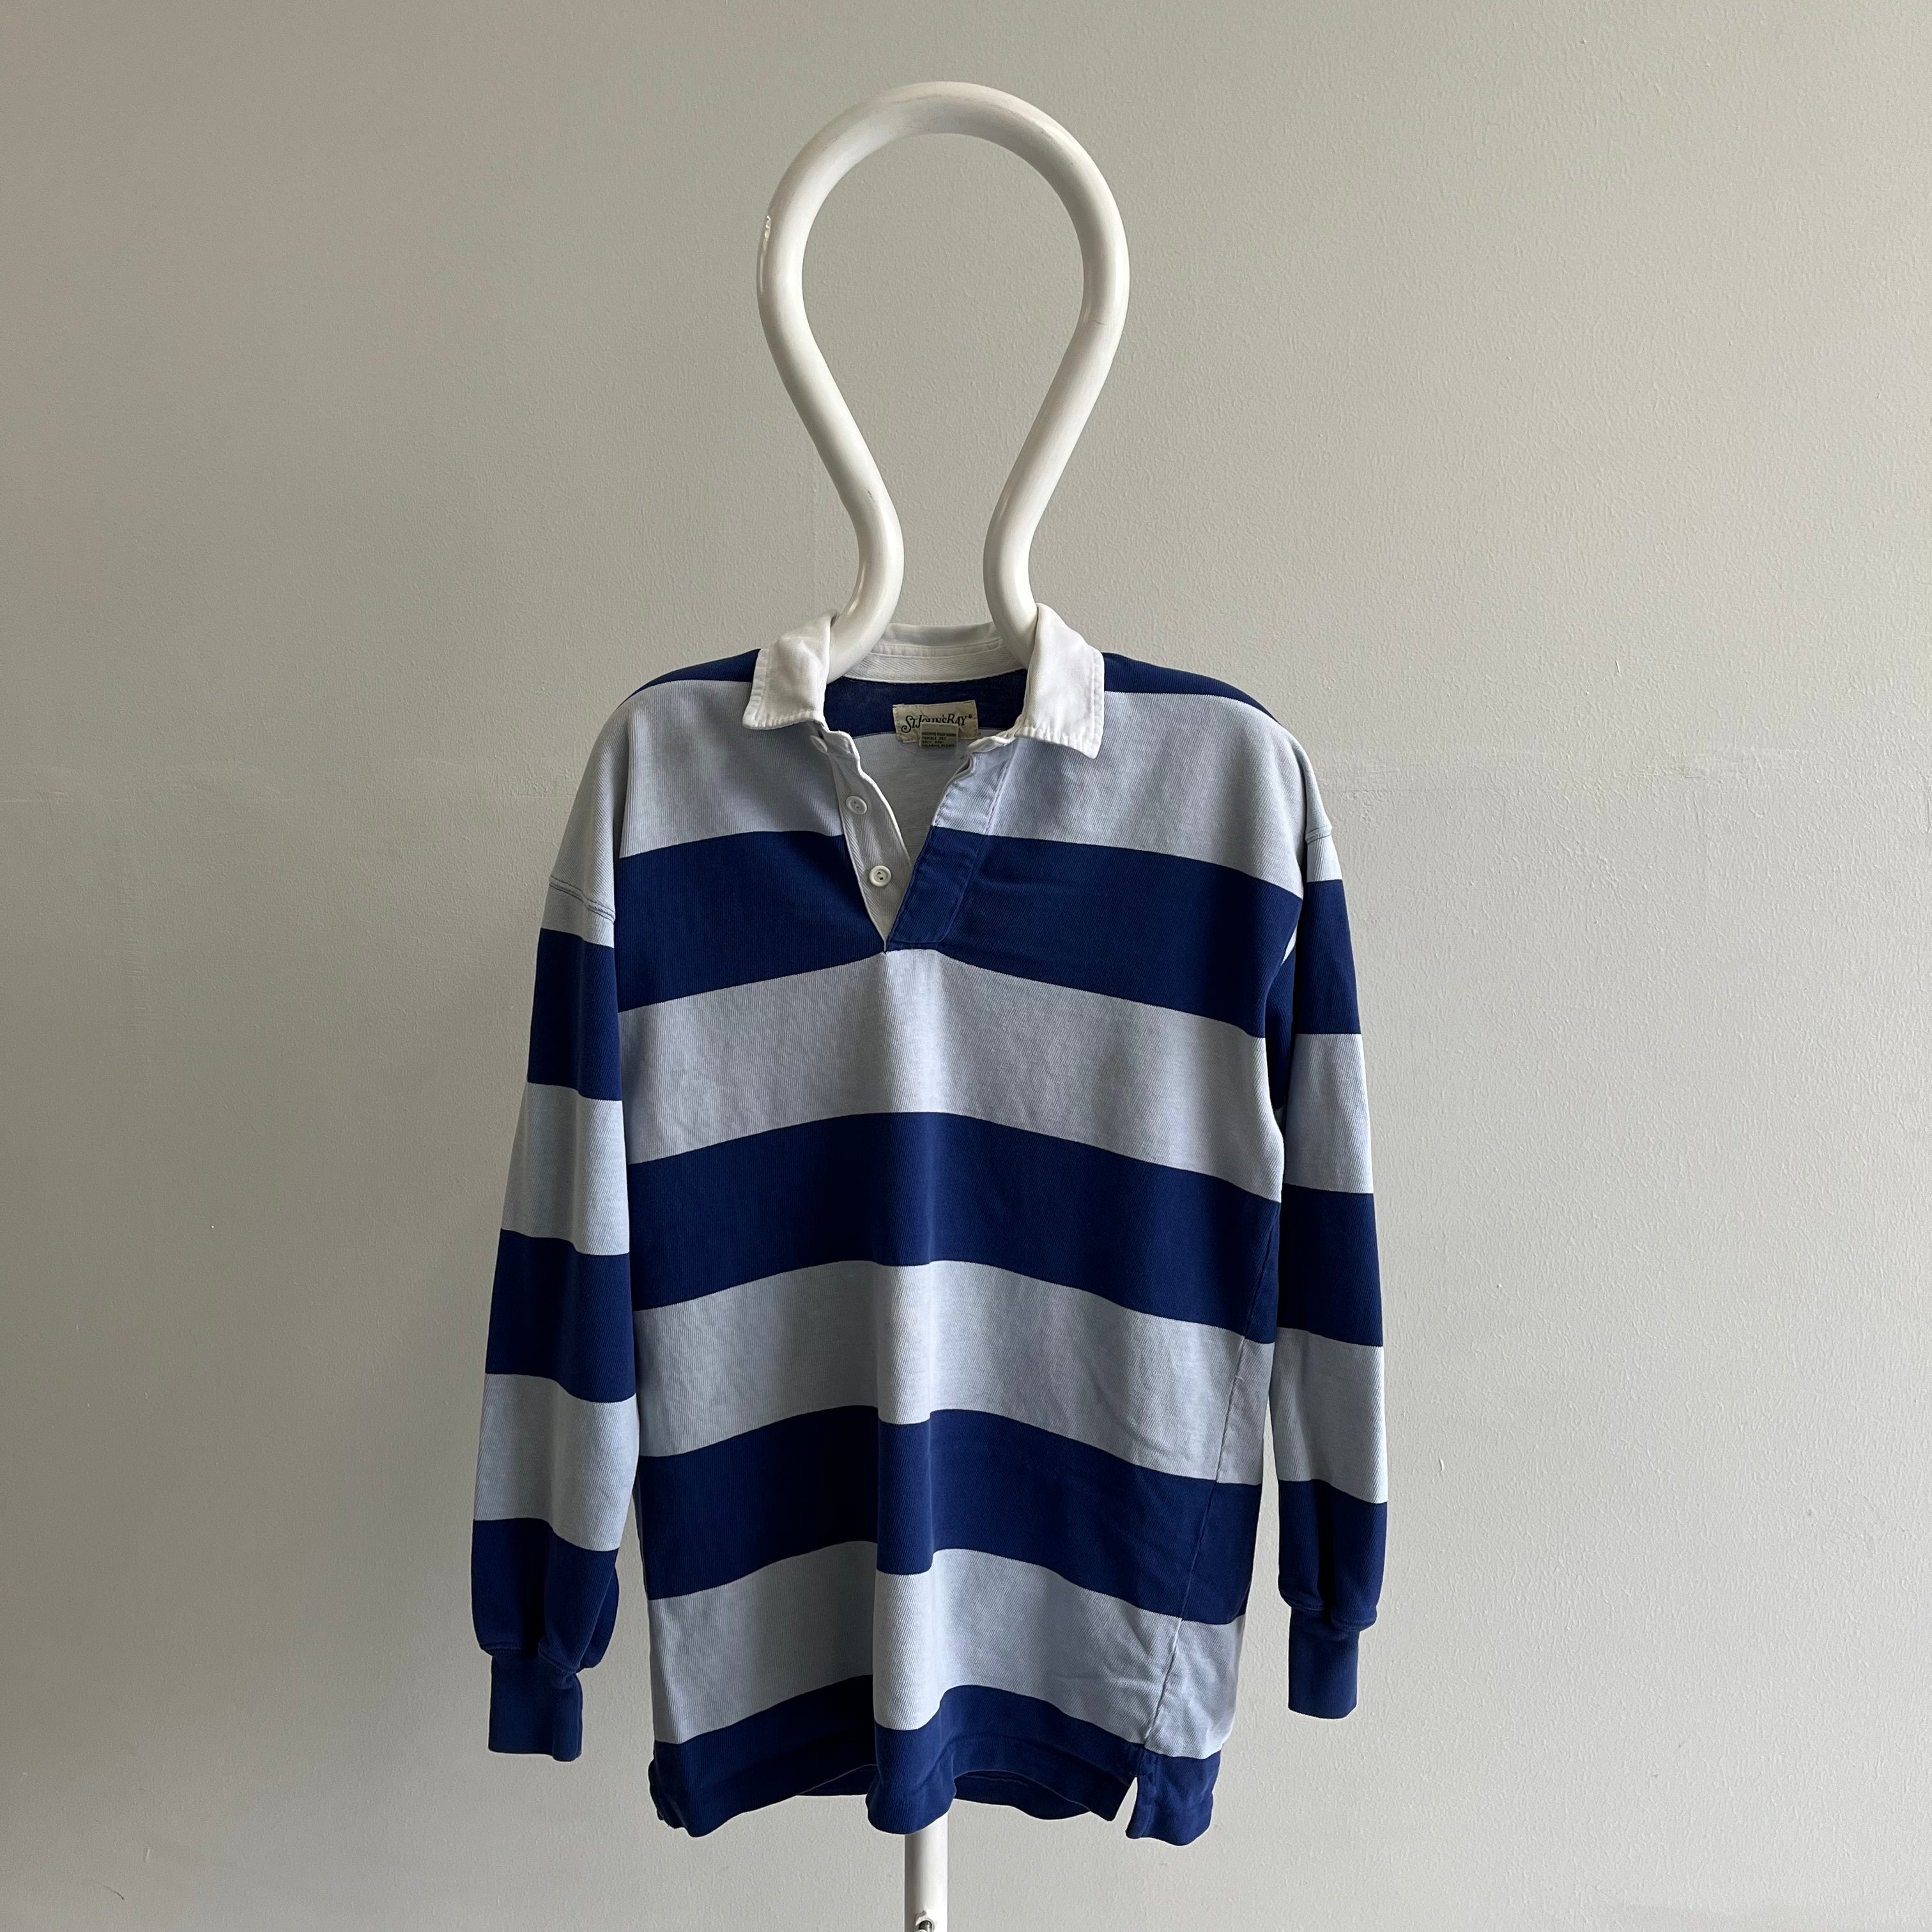 1990s Baby Blue and Navy Blue Rugby Shirt by St. John's Bay